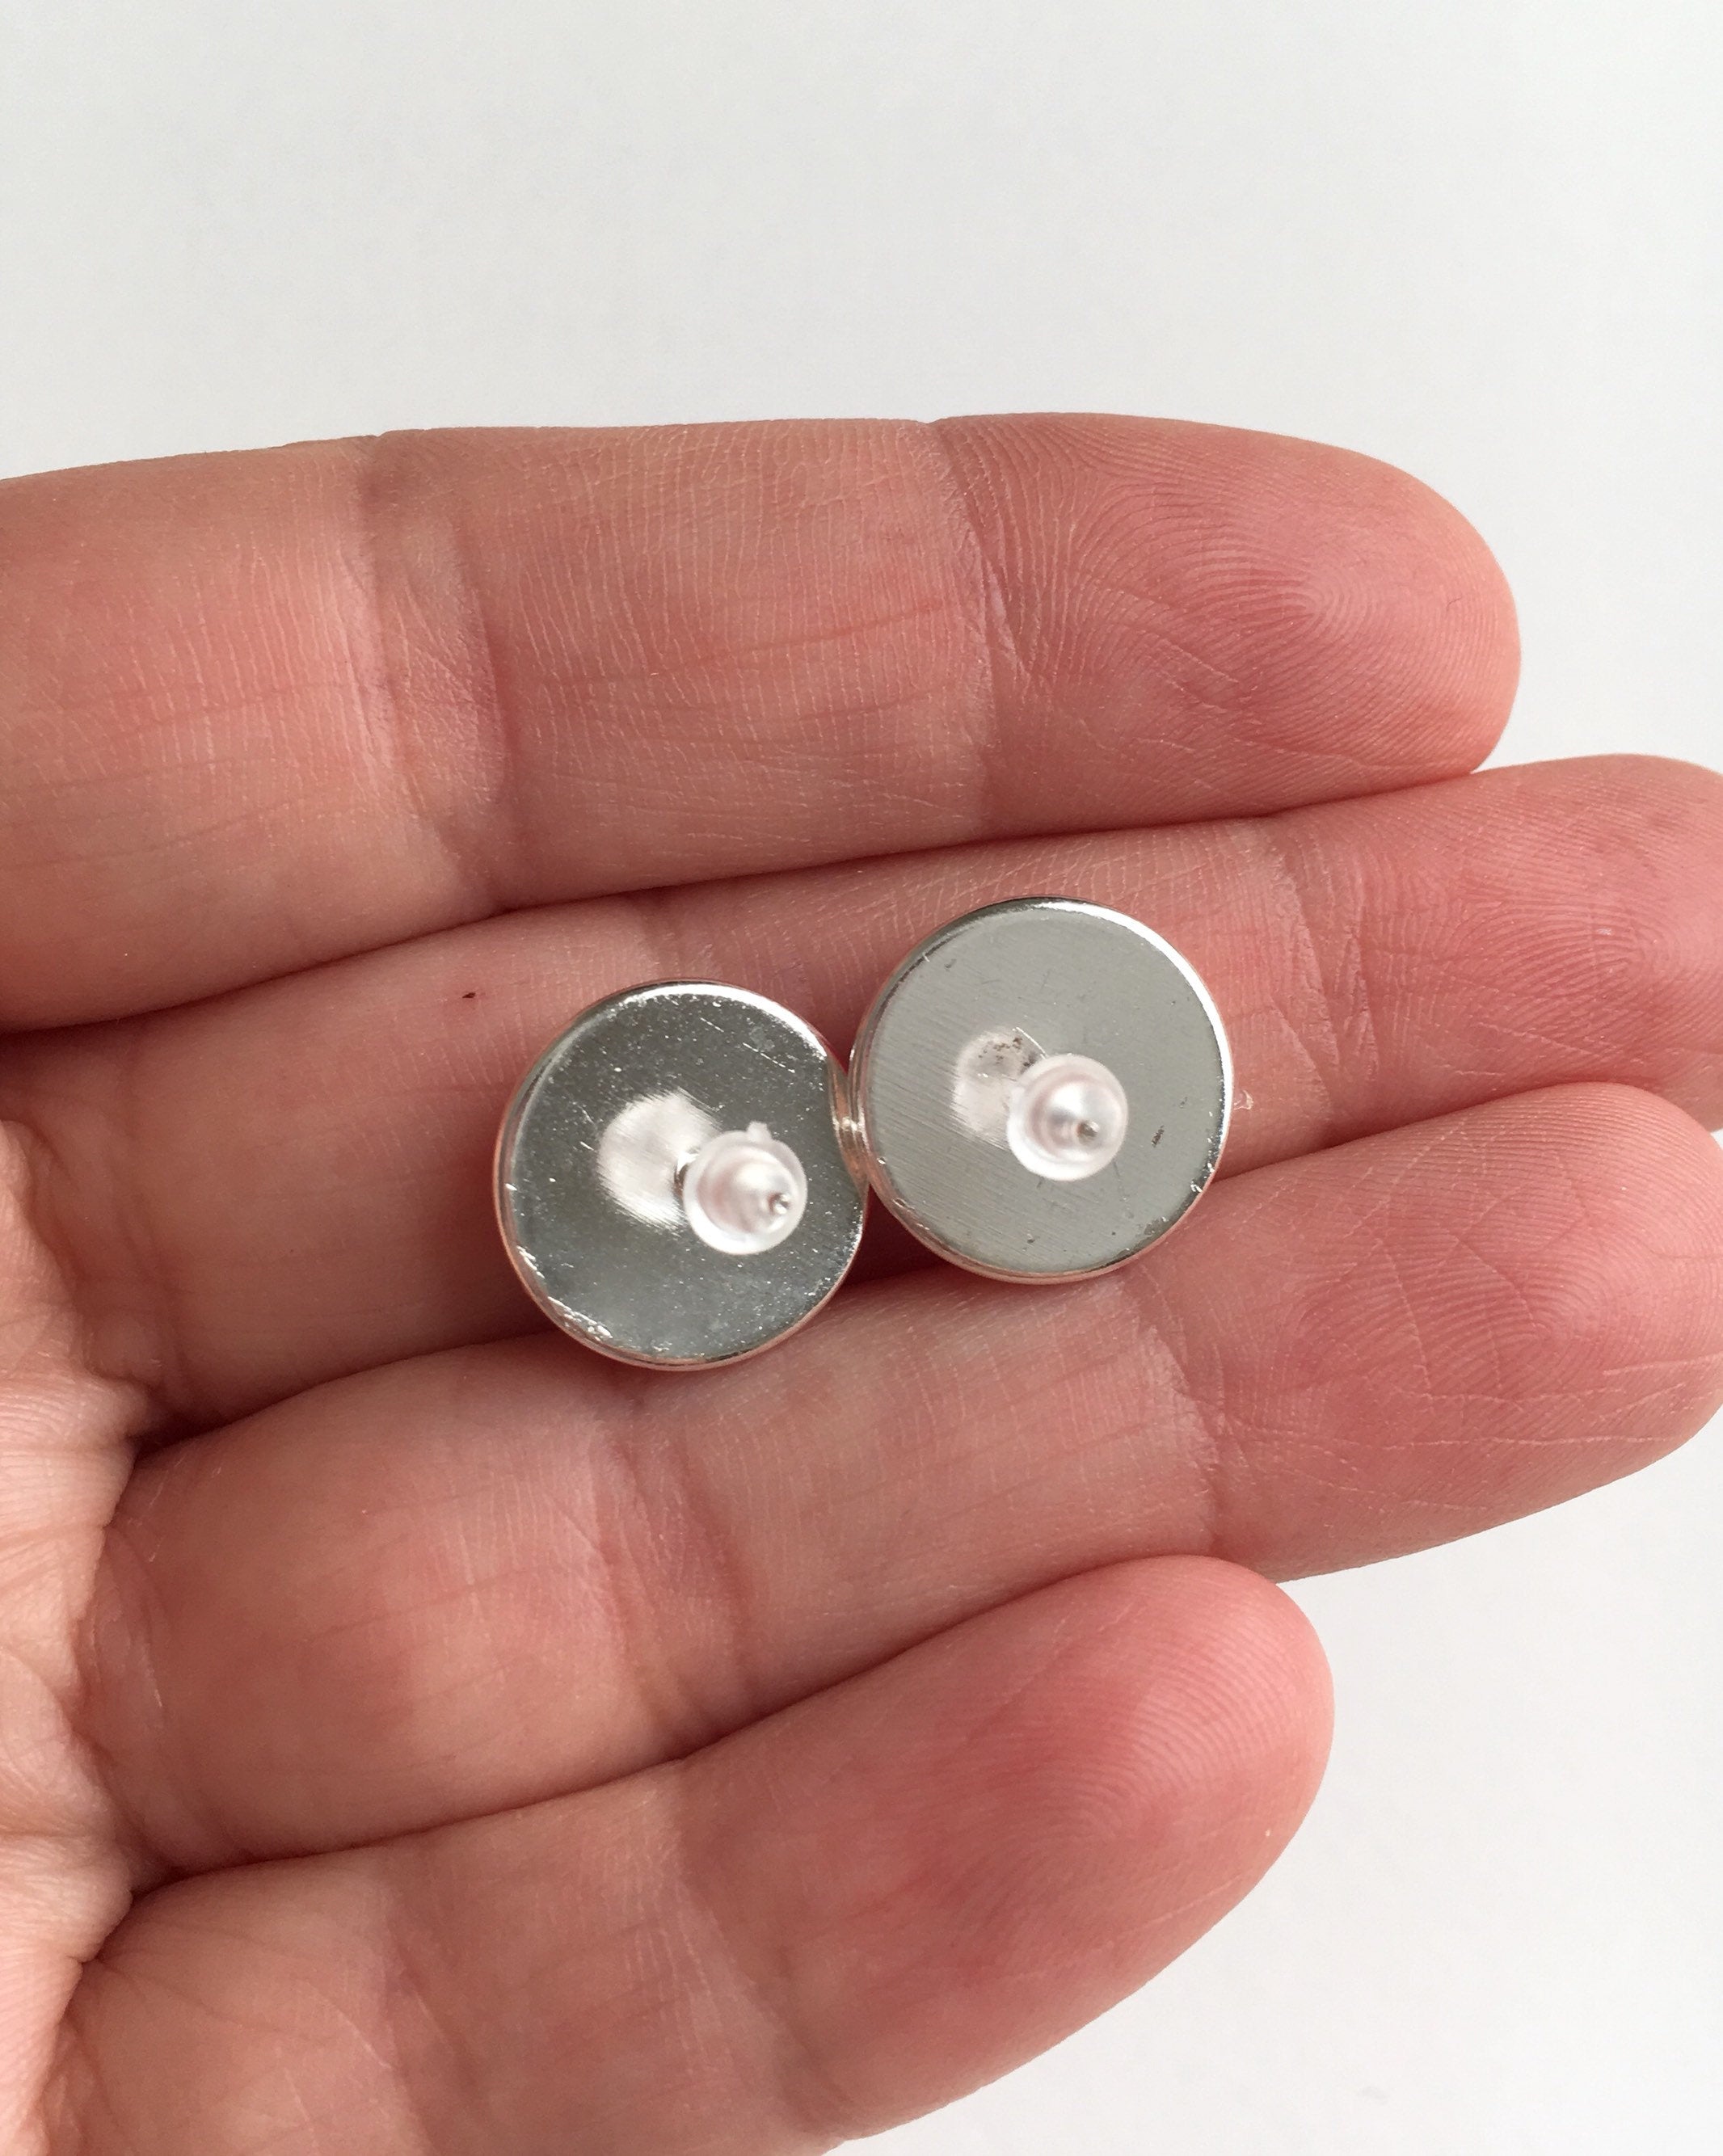 Back of silver setting stud earrings with rubber push back held in hand.